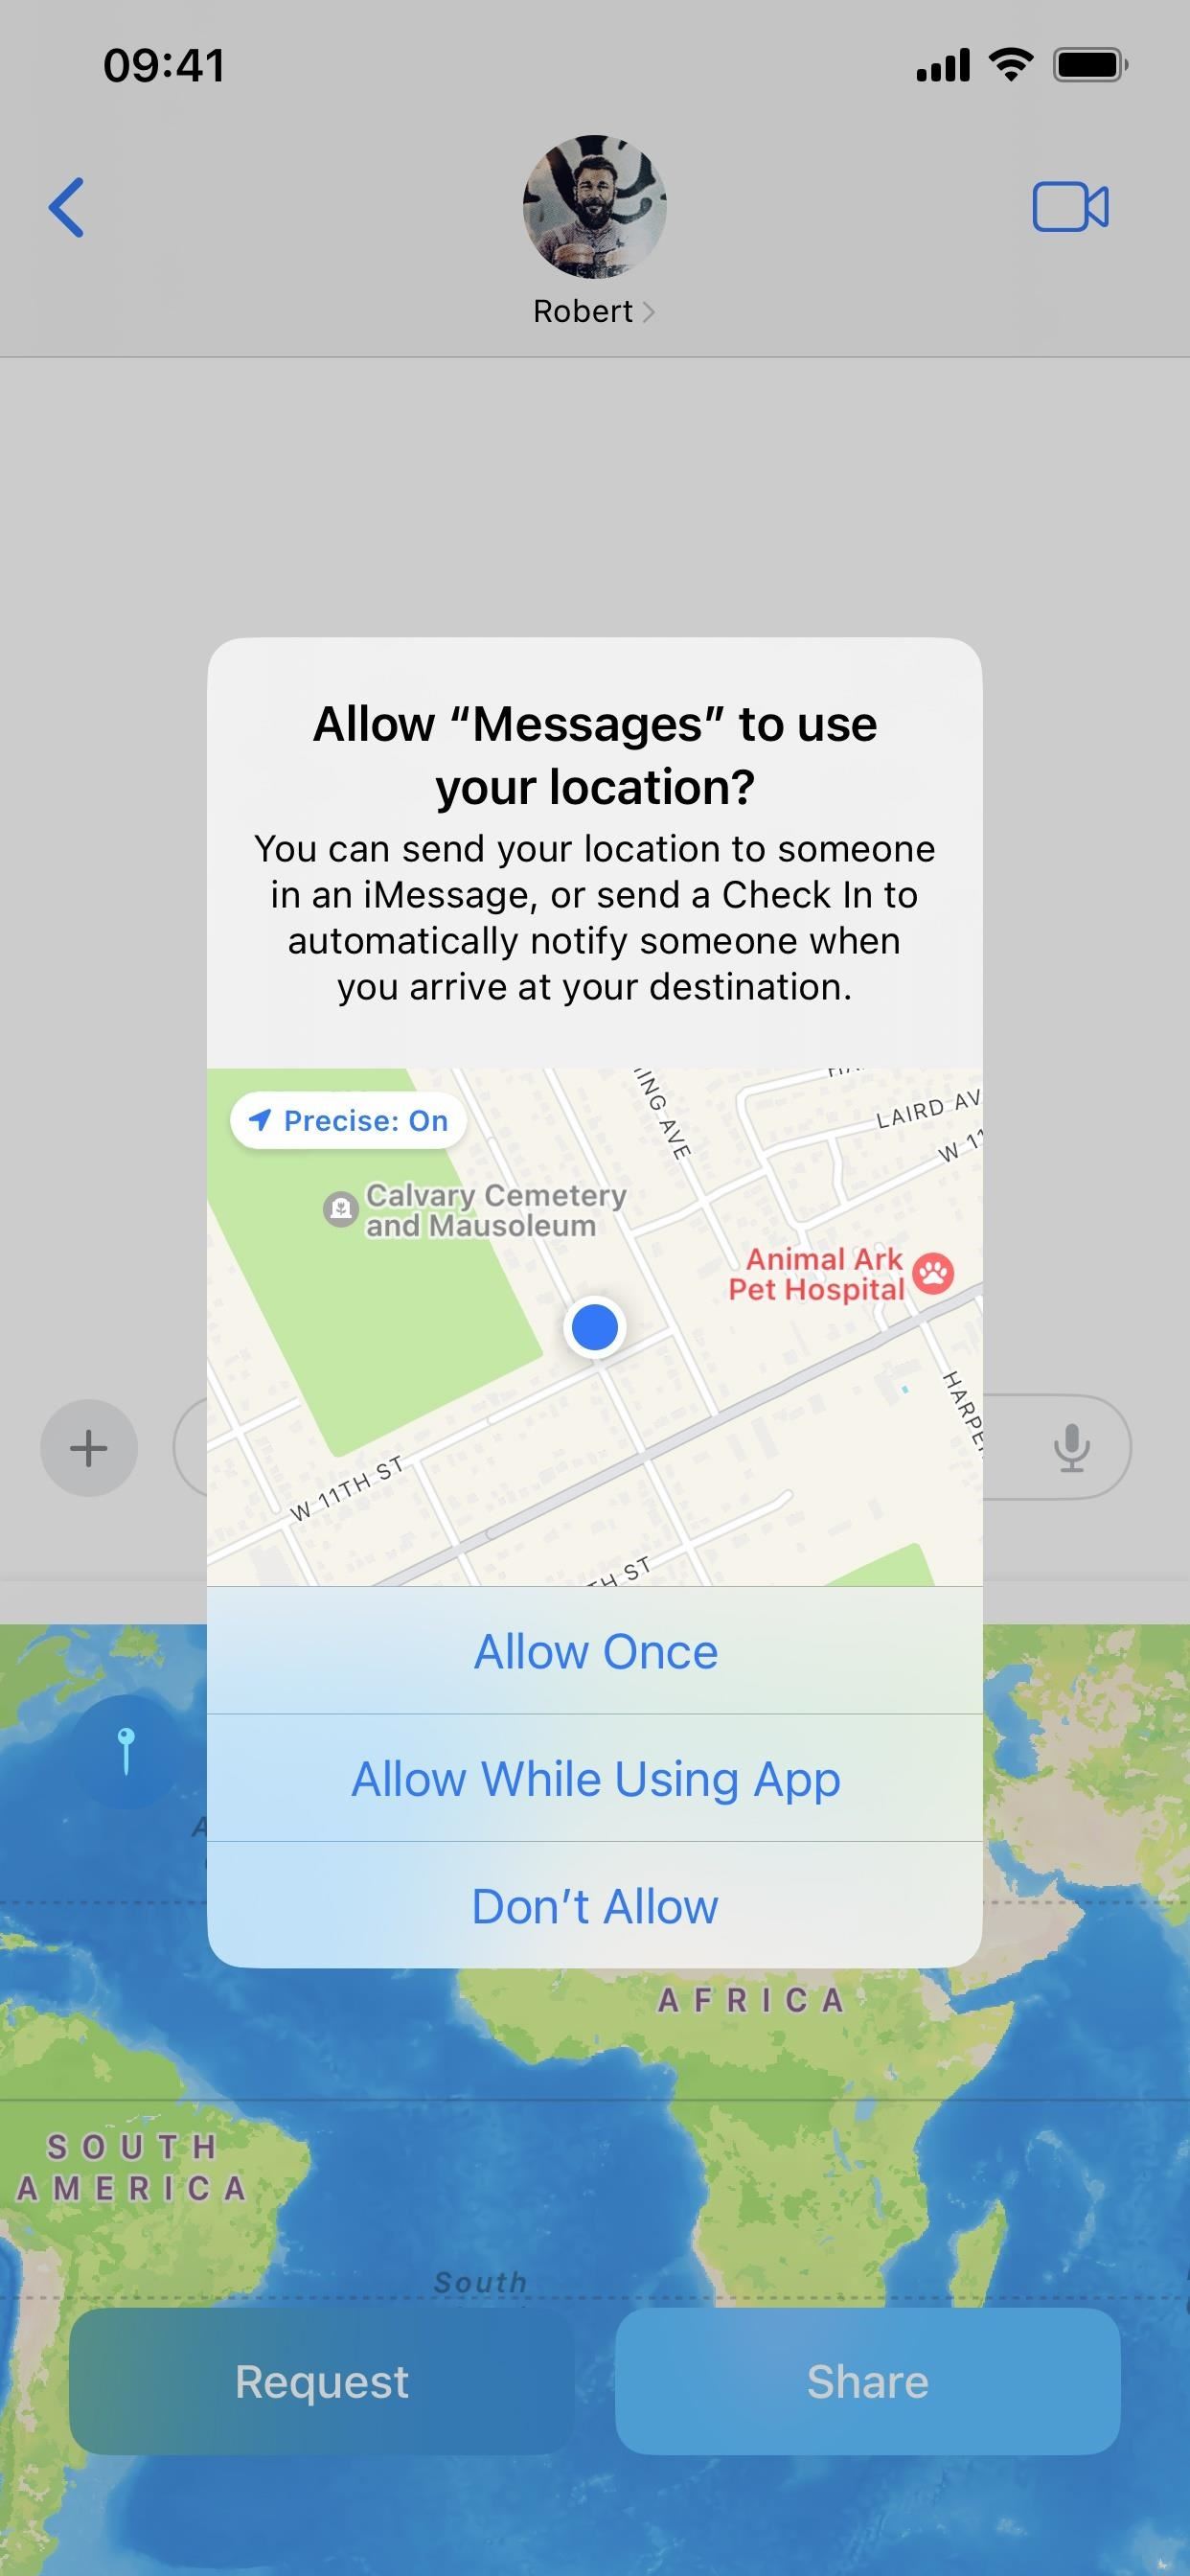 Your iPhone's Messages App Has 22 New Must-Try Features — And You Probably Didn't Know About Half of Them